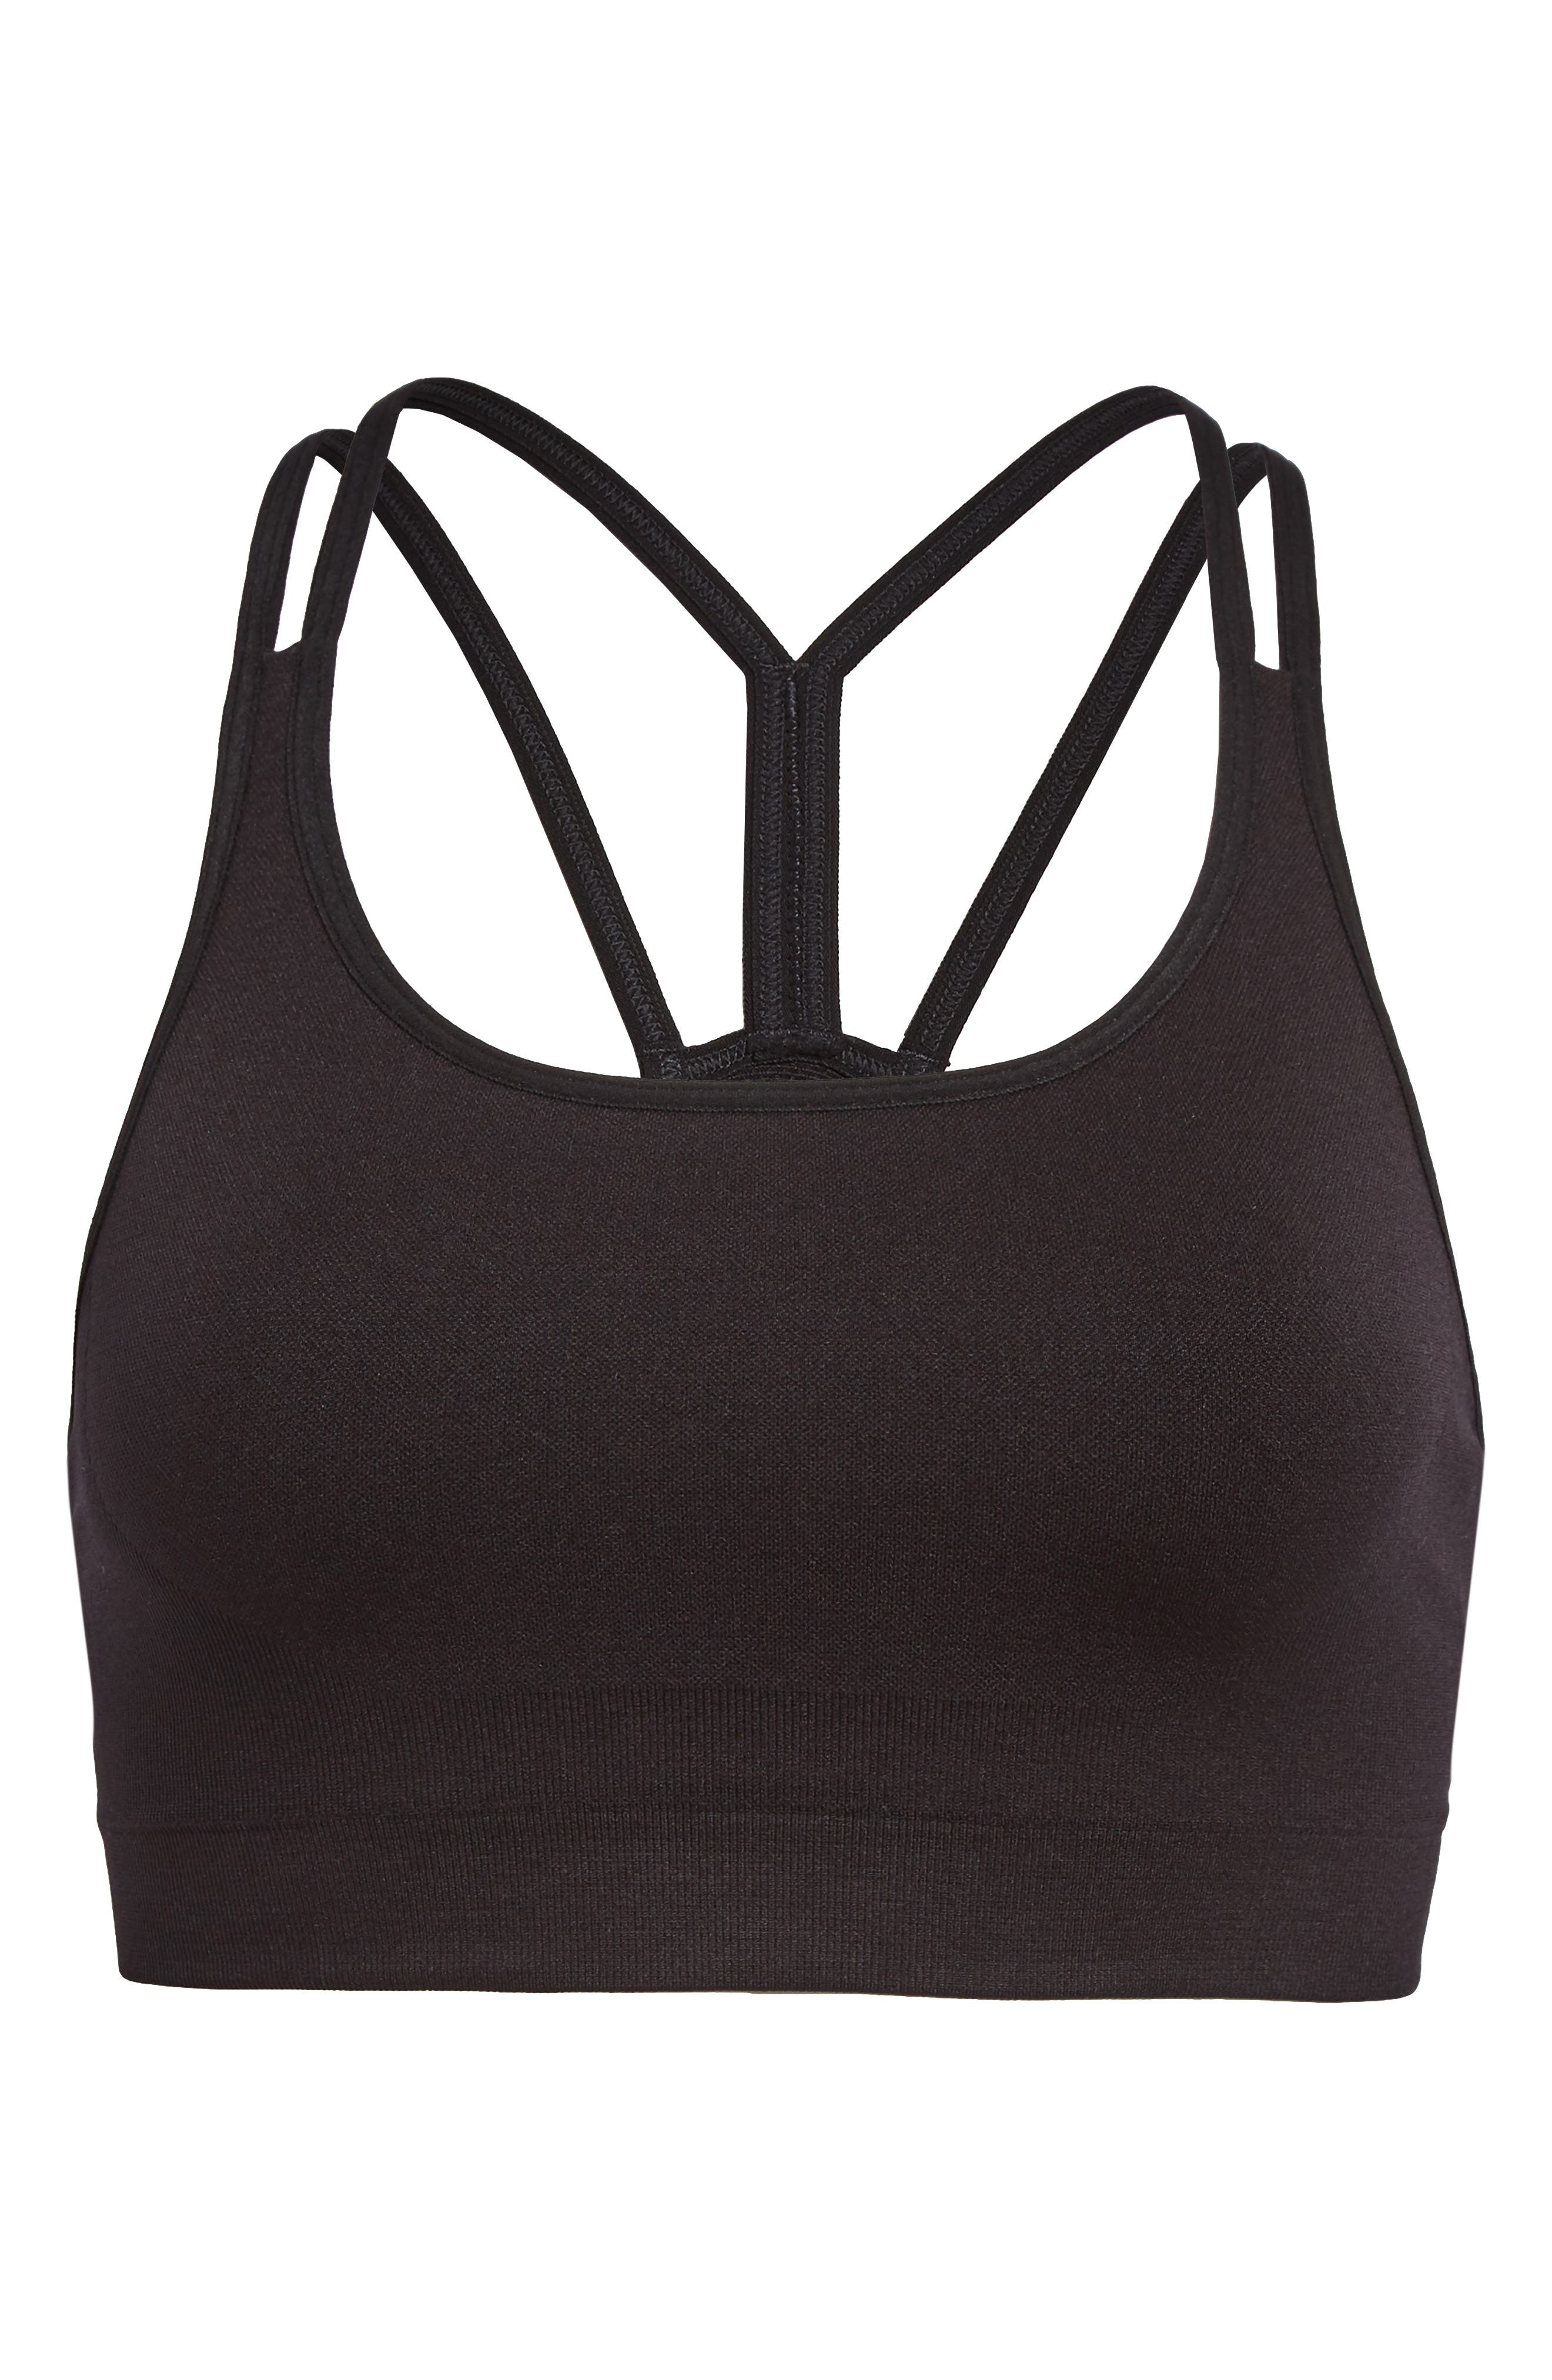 The 25 Best Supportive Sports Bras for Large Busts | Who What Wear